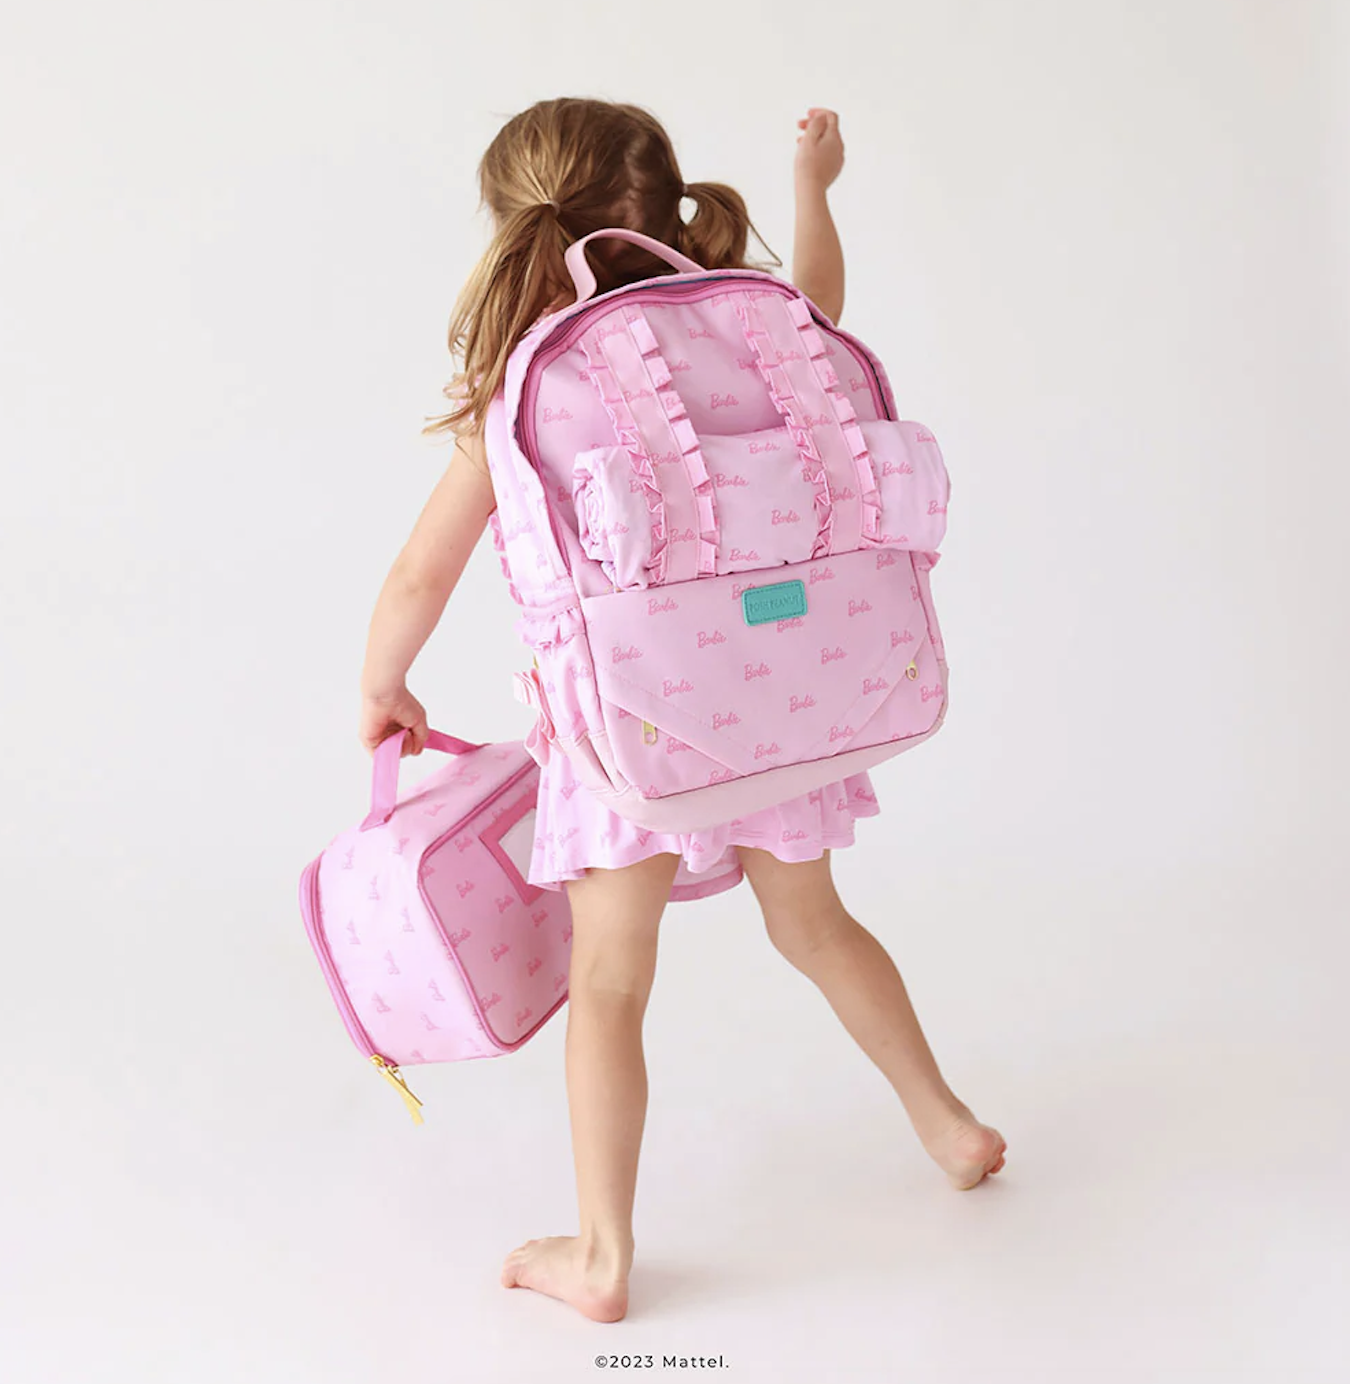 girl with barbie backpack on